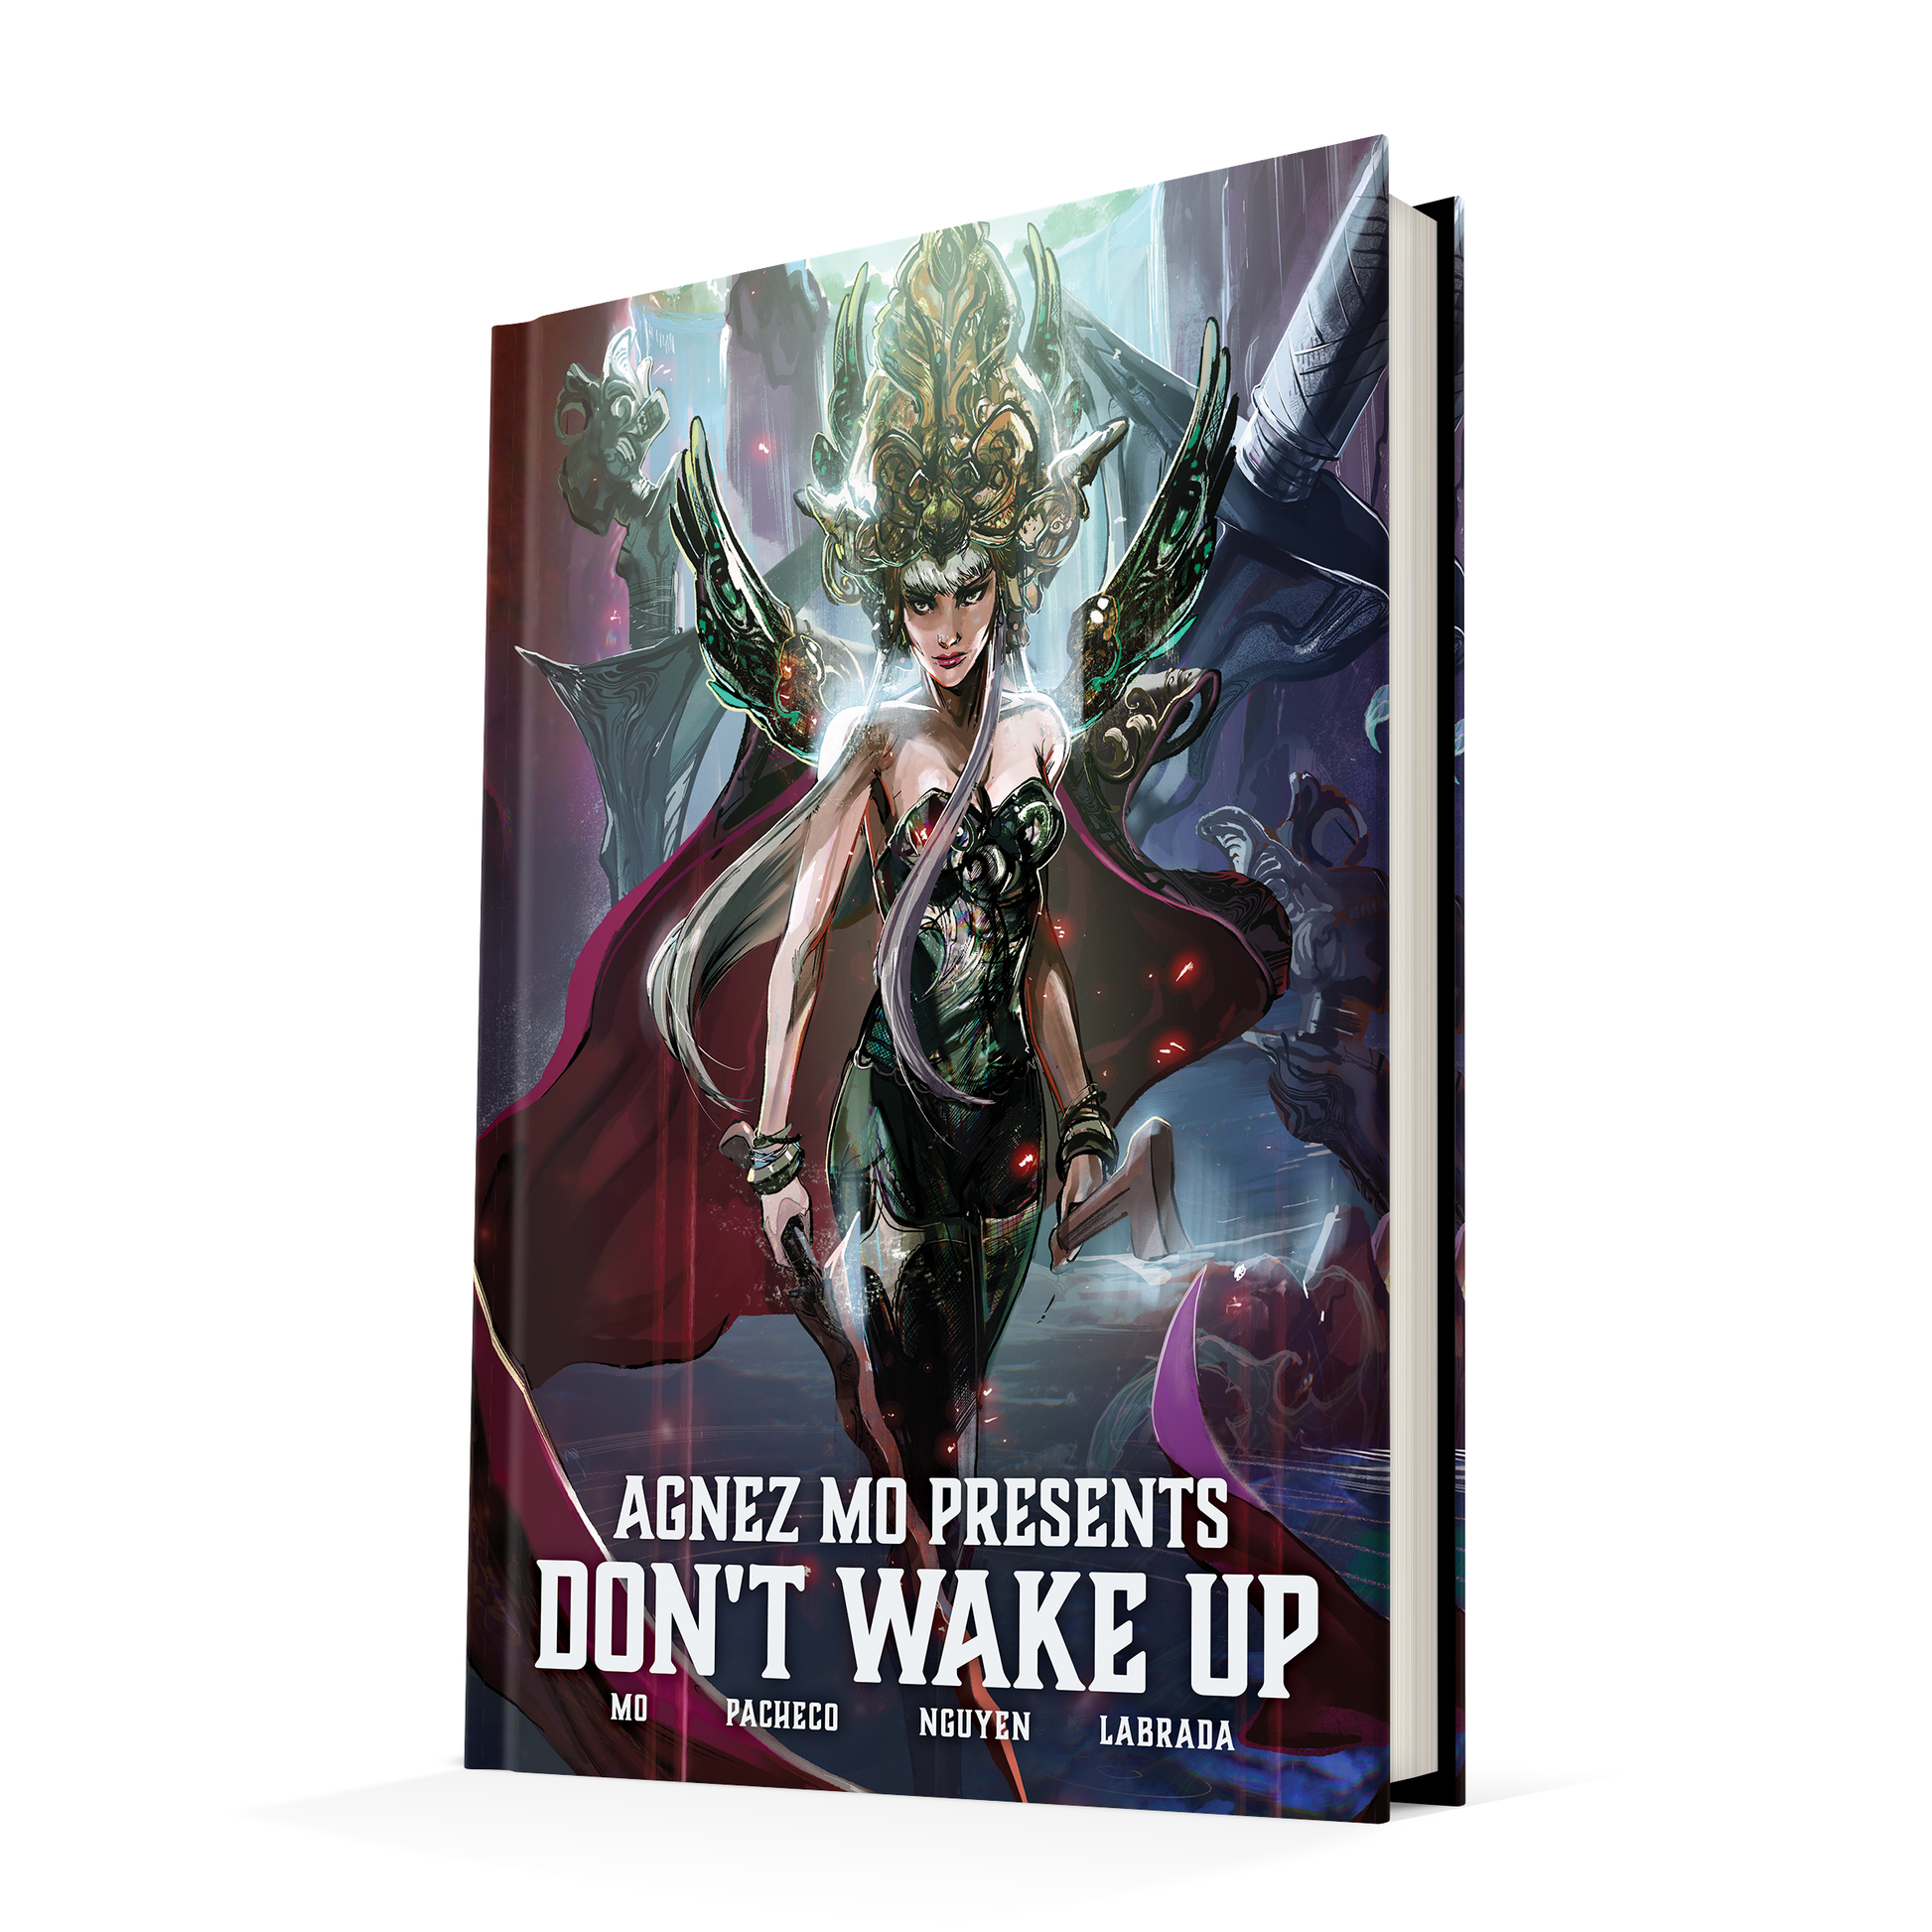 Agnez Mo Presents: Don't Wake Up (6571605360780)